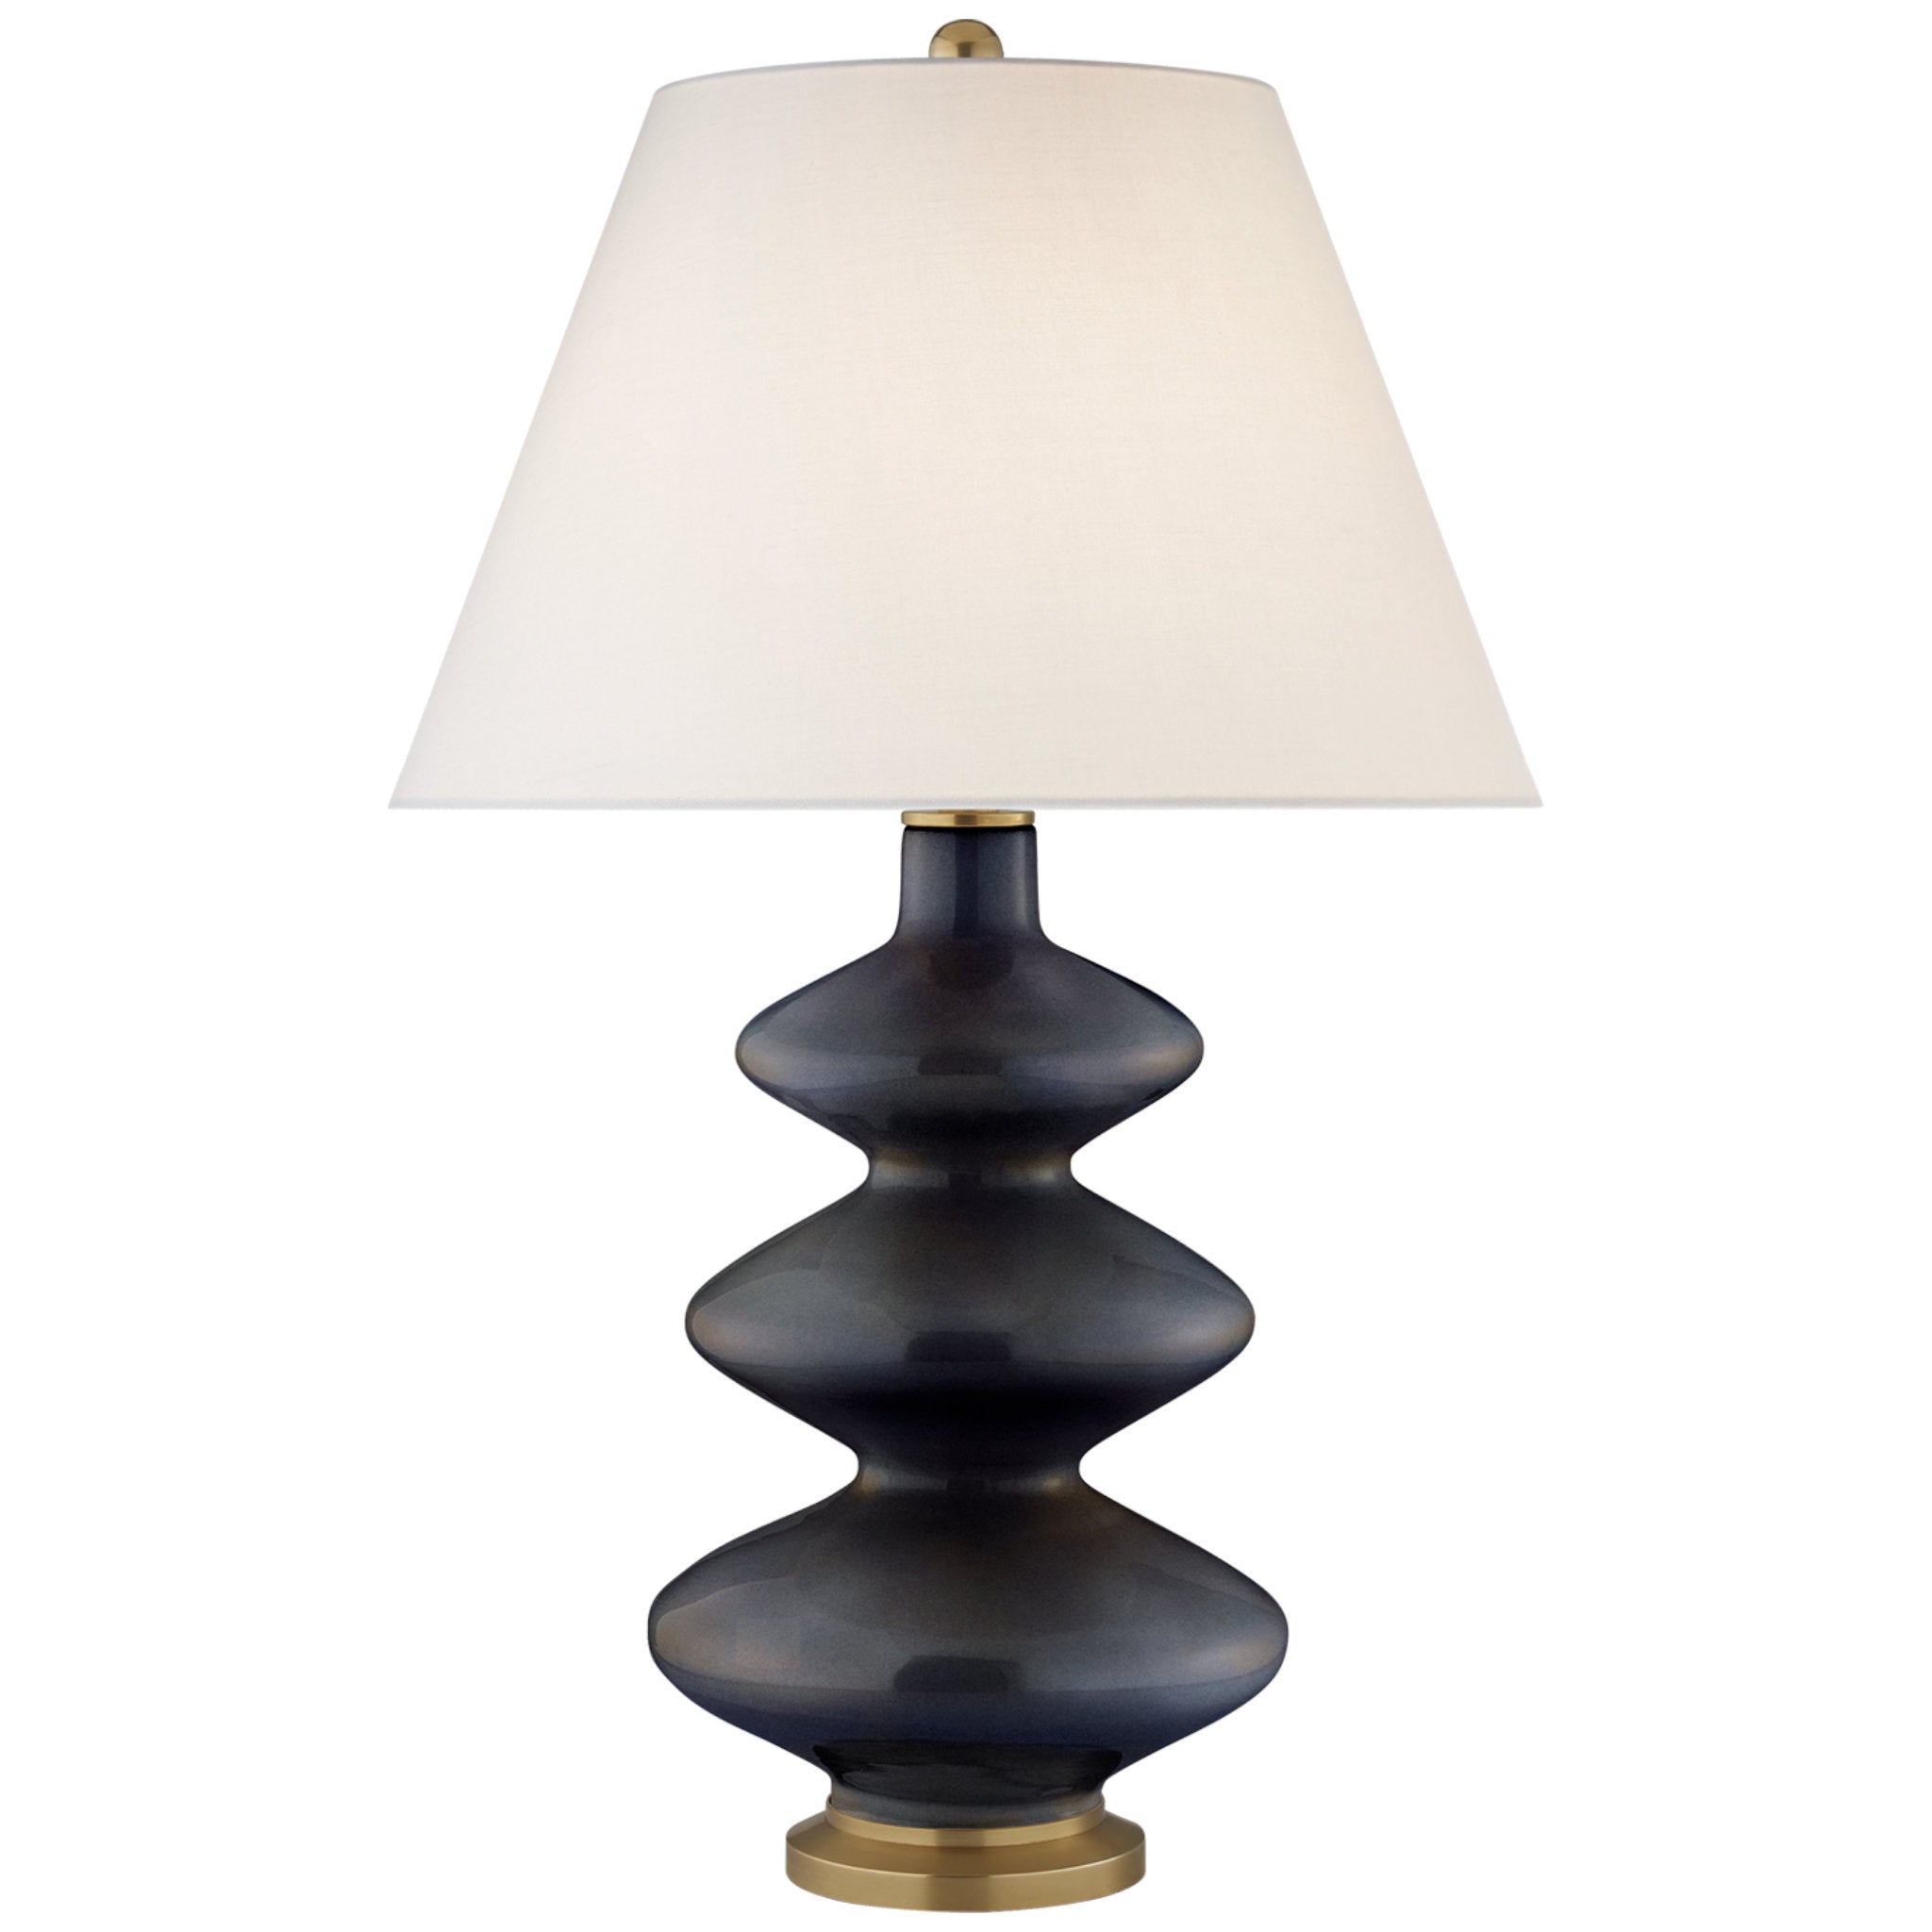 Christopher Spitzmiller Smith Medium Table Lamp in Mixed Blue Brown with Linen Shade